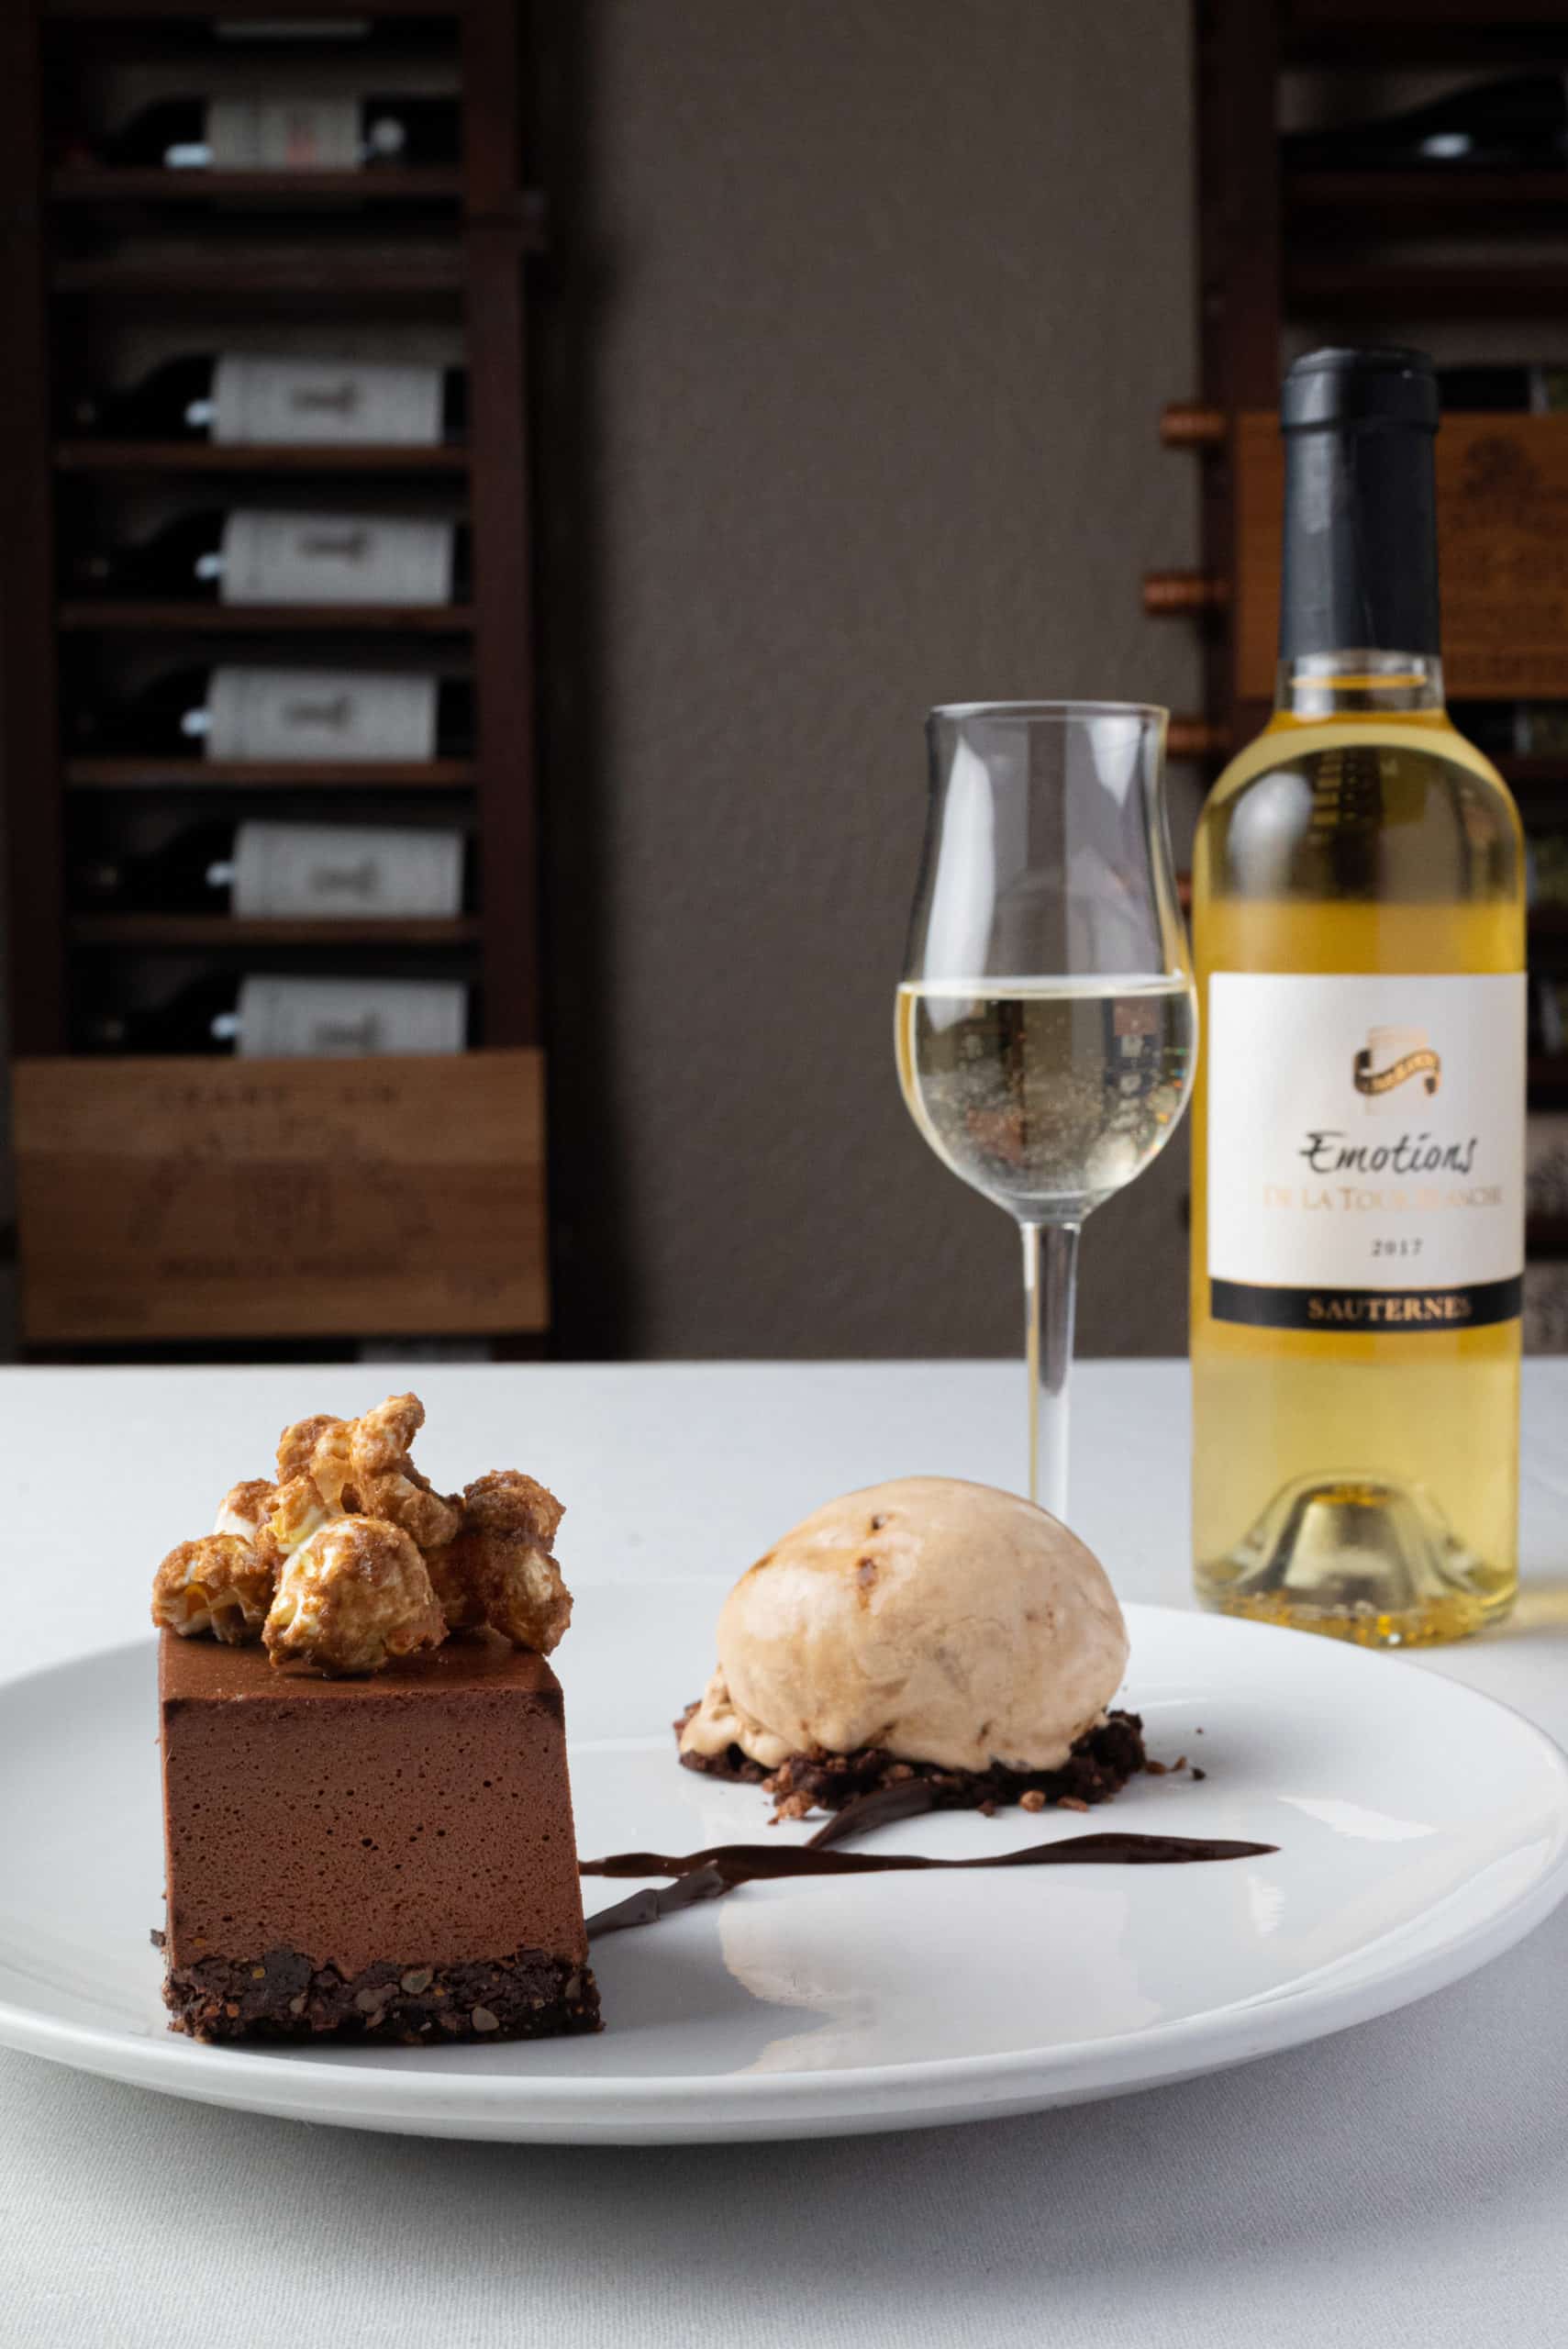 Vertical Image of Dessert plate with ice cream and chocolate cheese cake paired with white wine